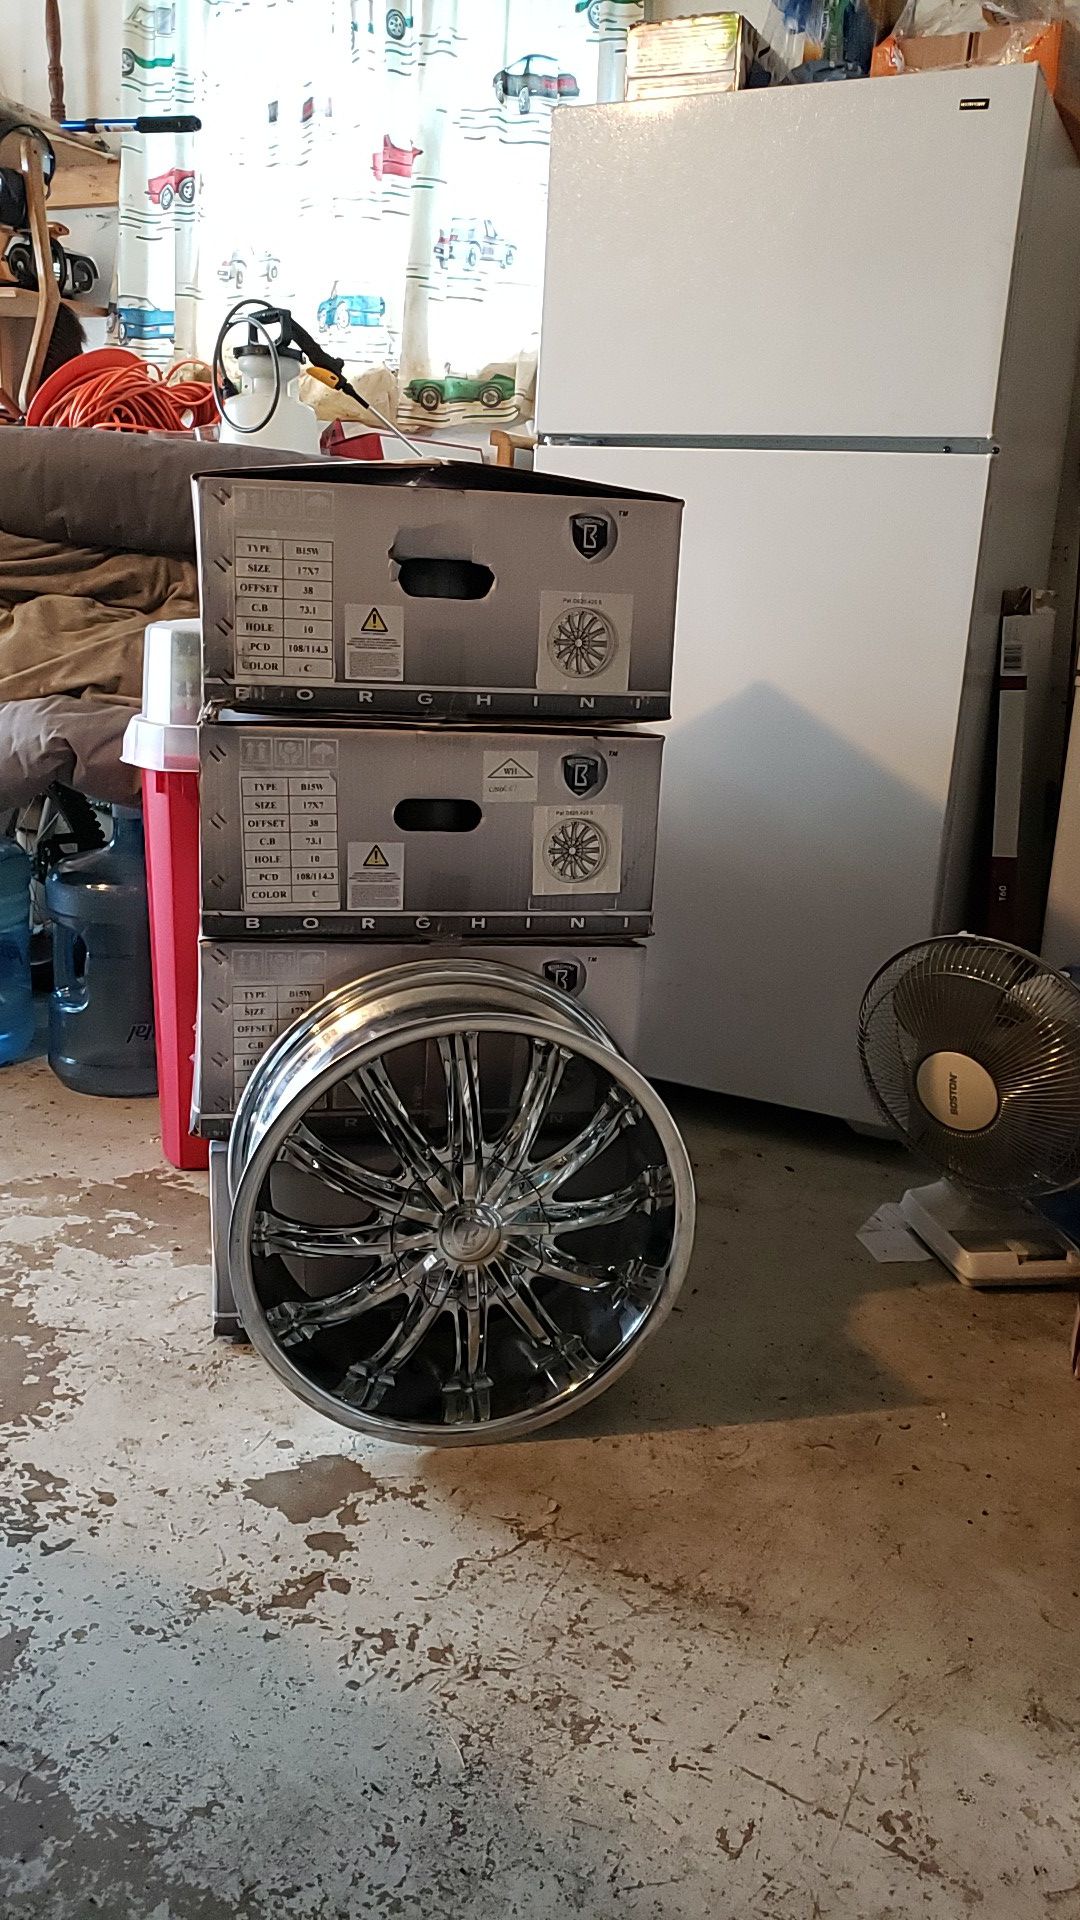 "17 Chrome Wheels-Tires not included